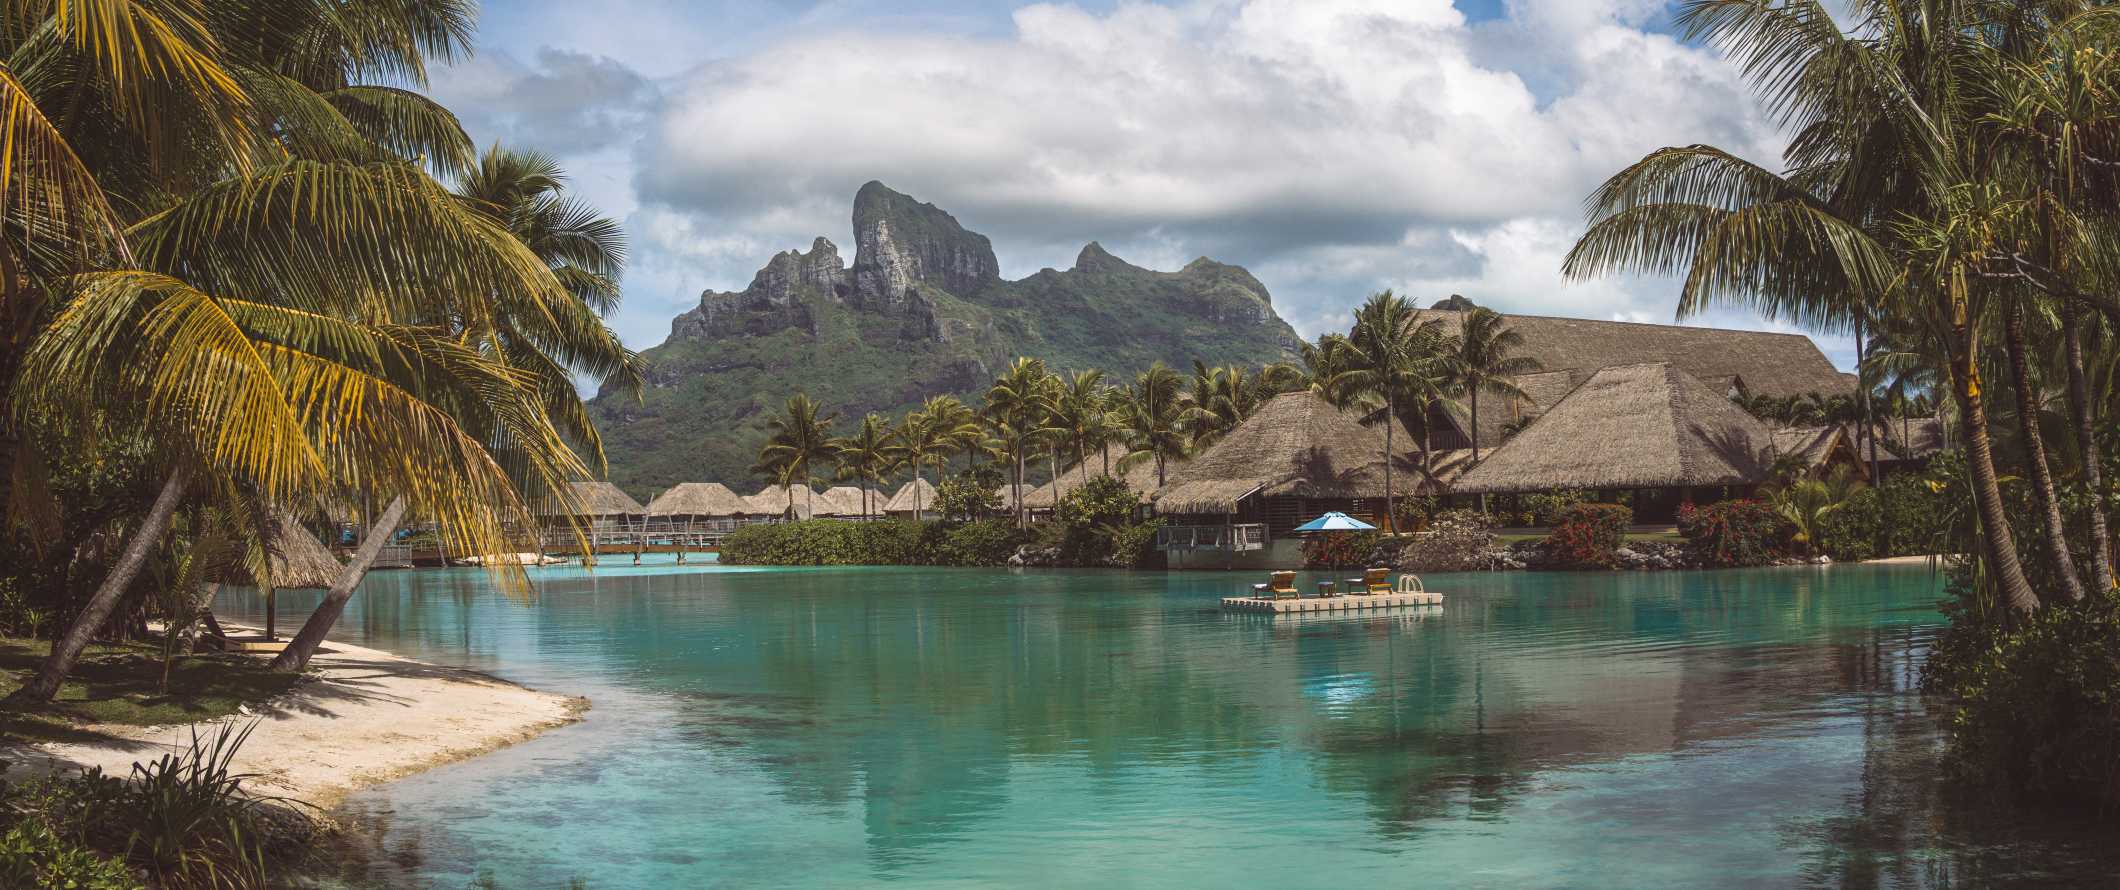 Overwater bungalows and clear waters with a sharp mountain peak rising in the background in Bora Bora, French Polynesia